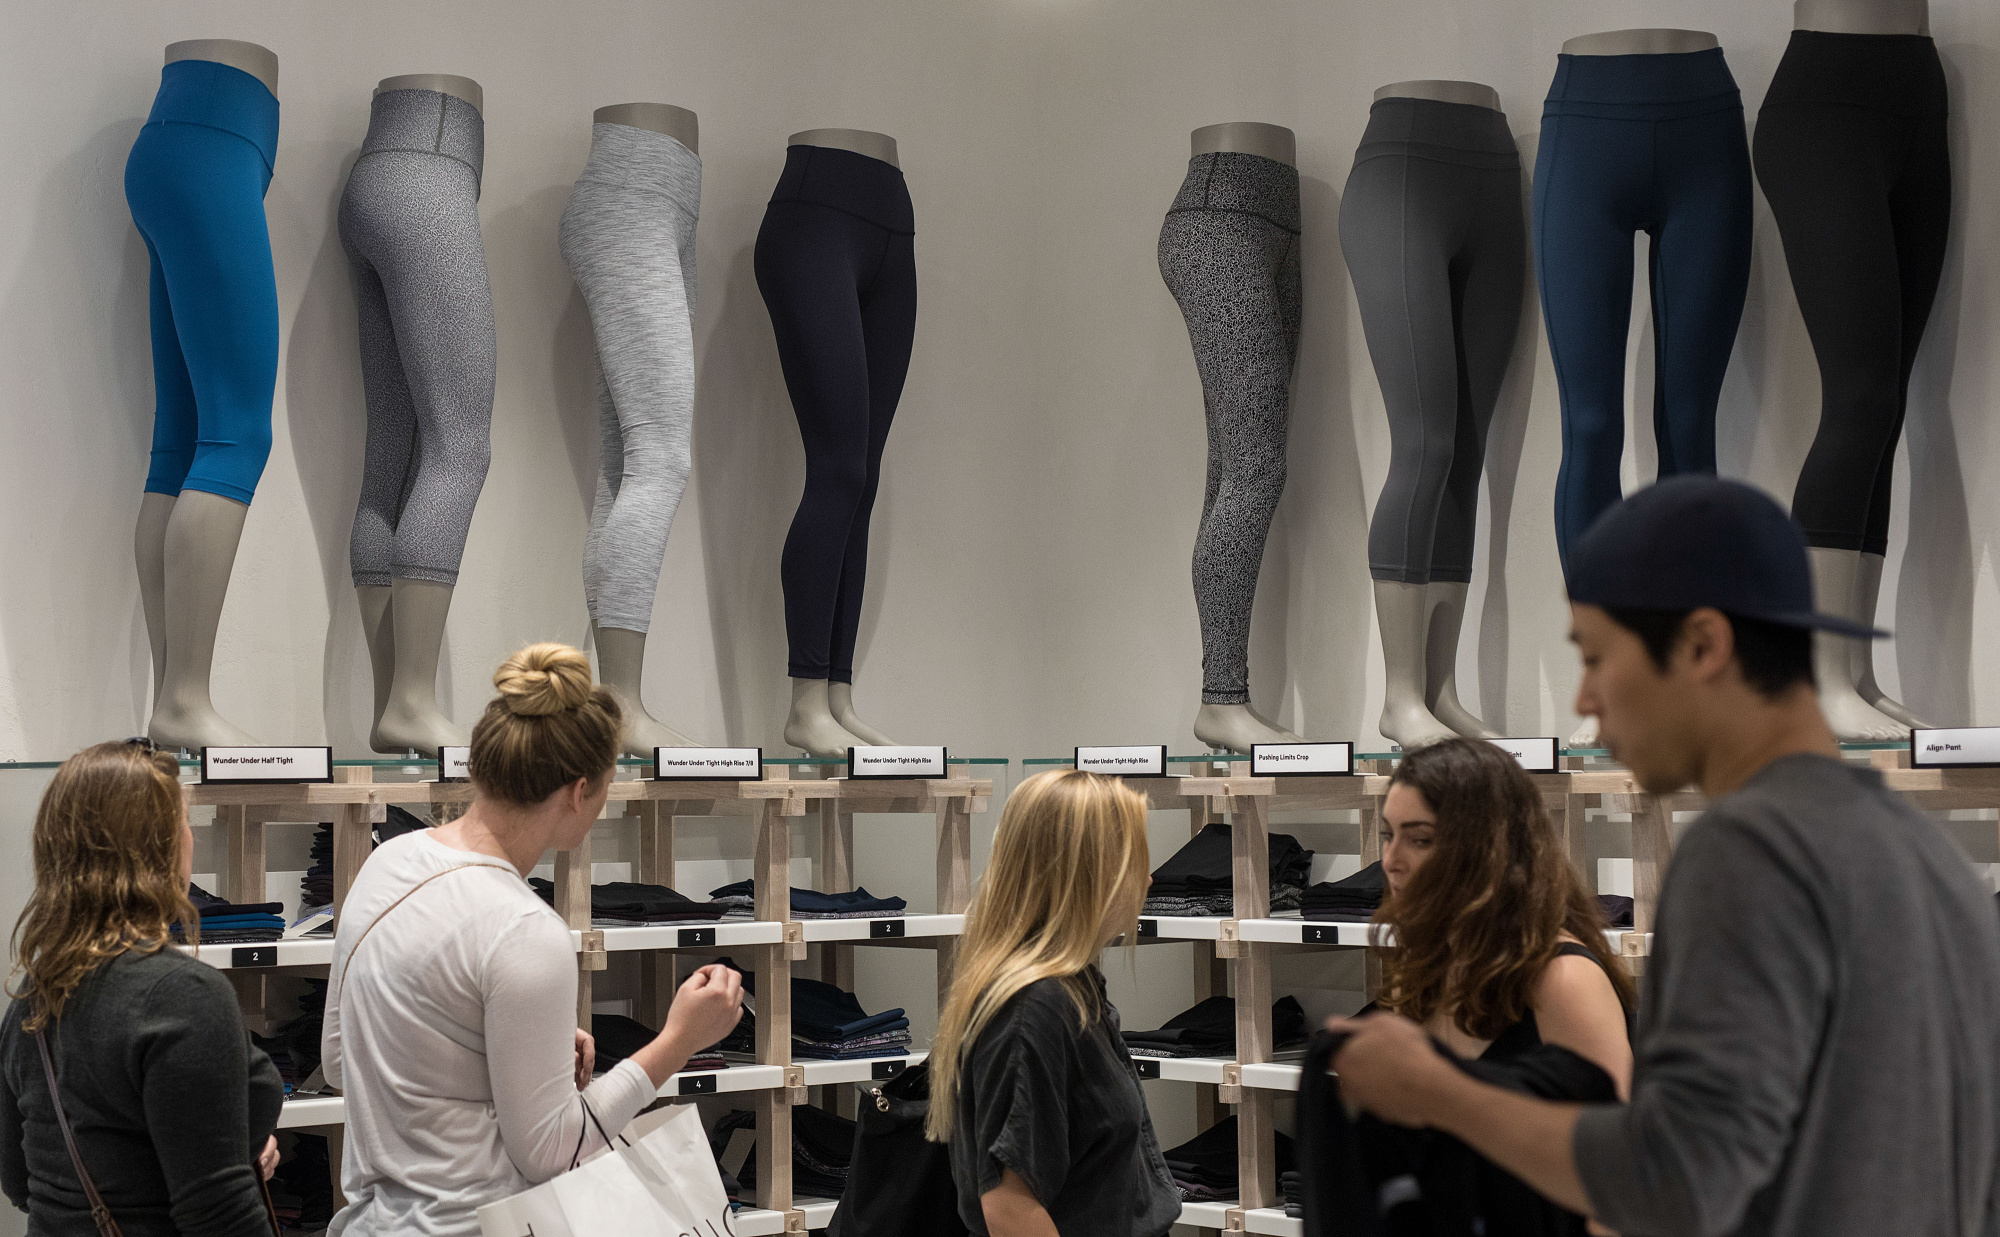 Lululemon strikes five-year partnership with Peloton for content